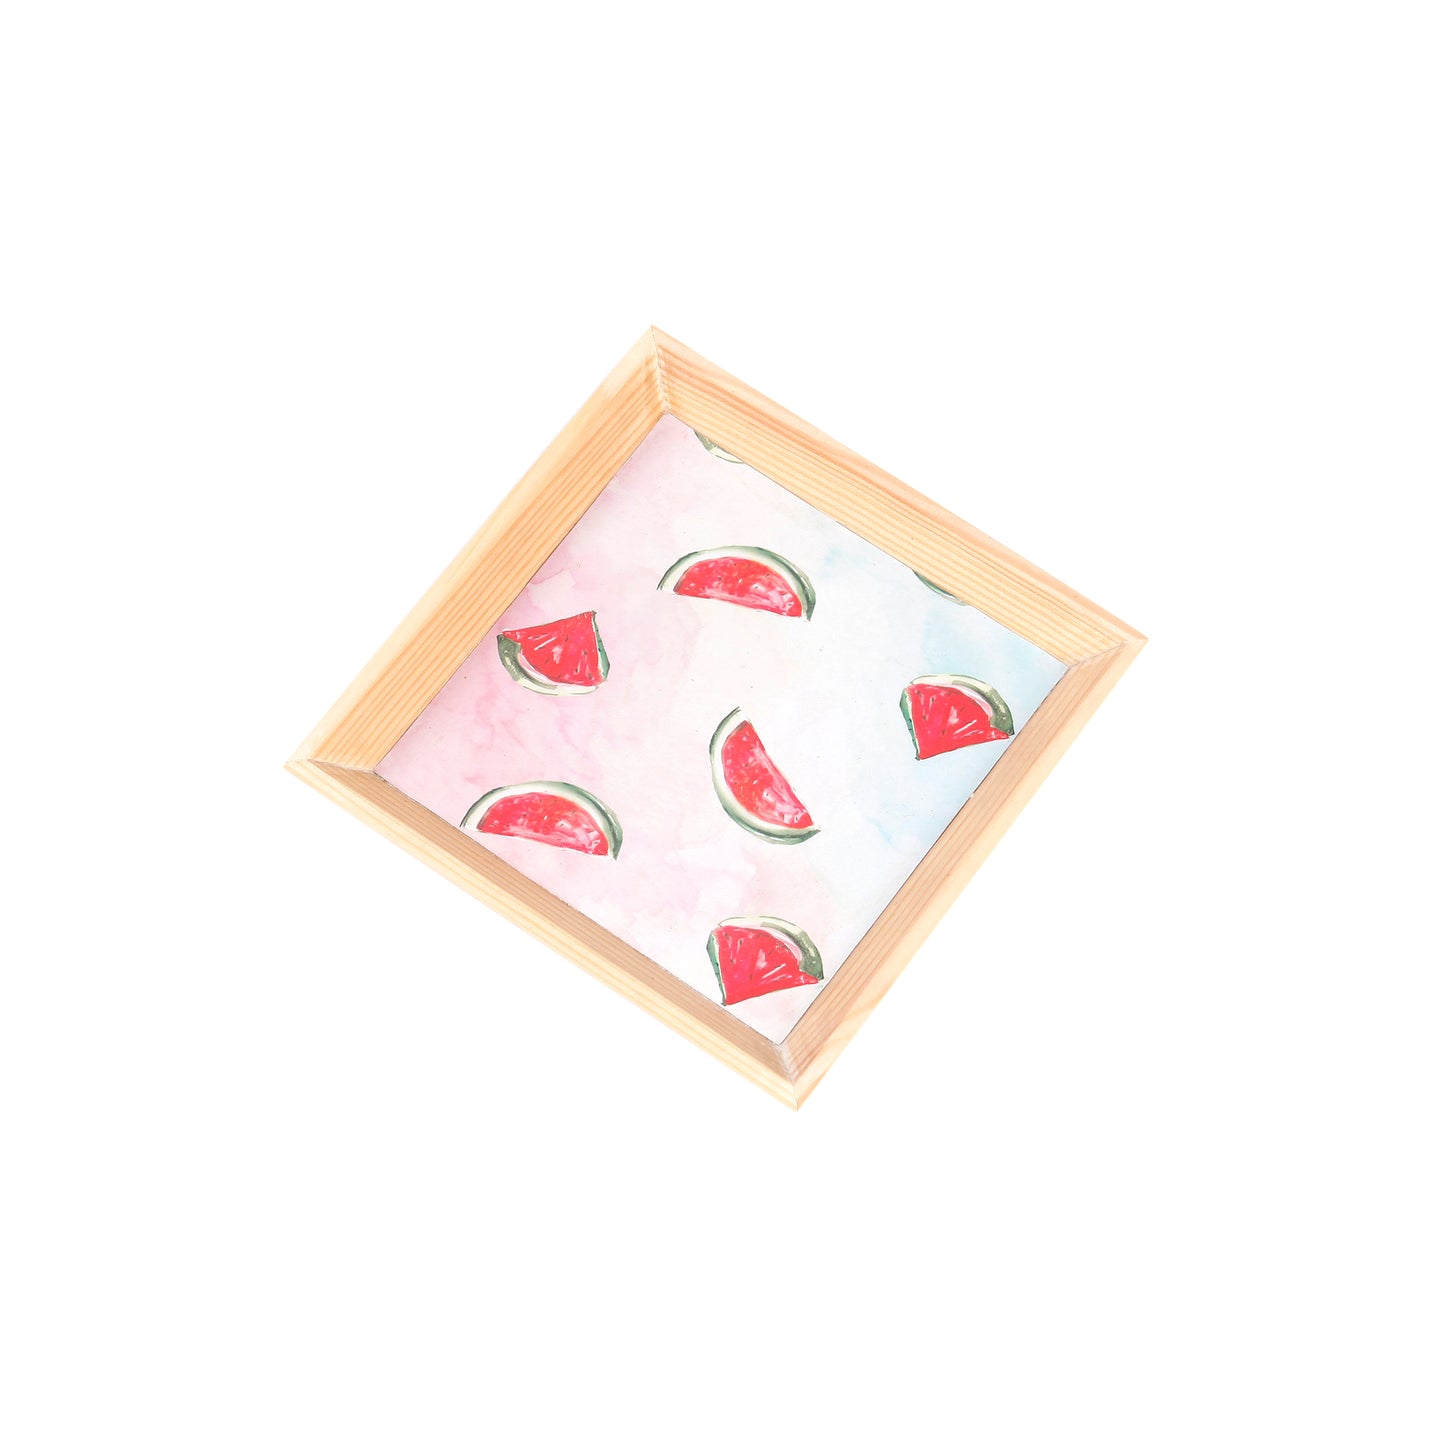 A Tiny Mistake Watermelon Small Square Wooden Serving Tray, 18 x 18 x 2 cm